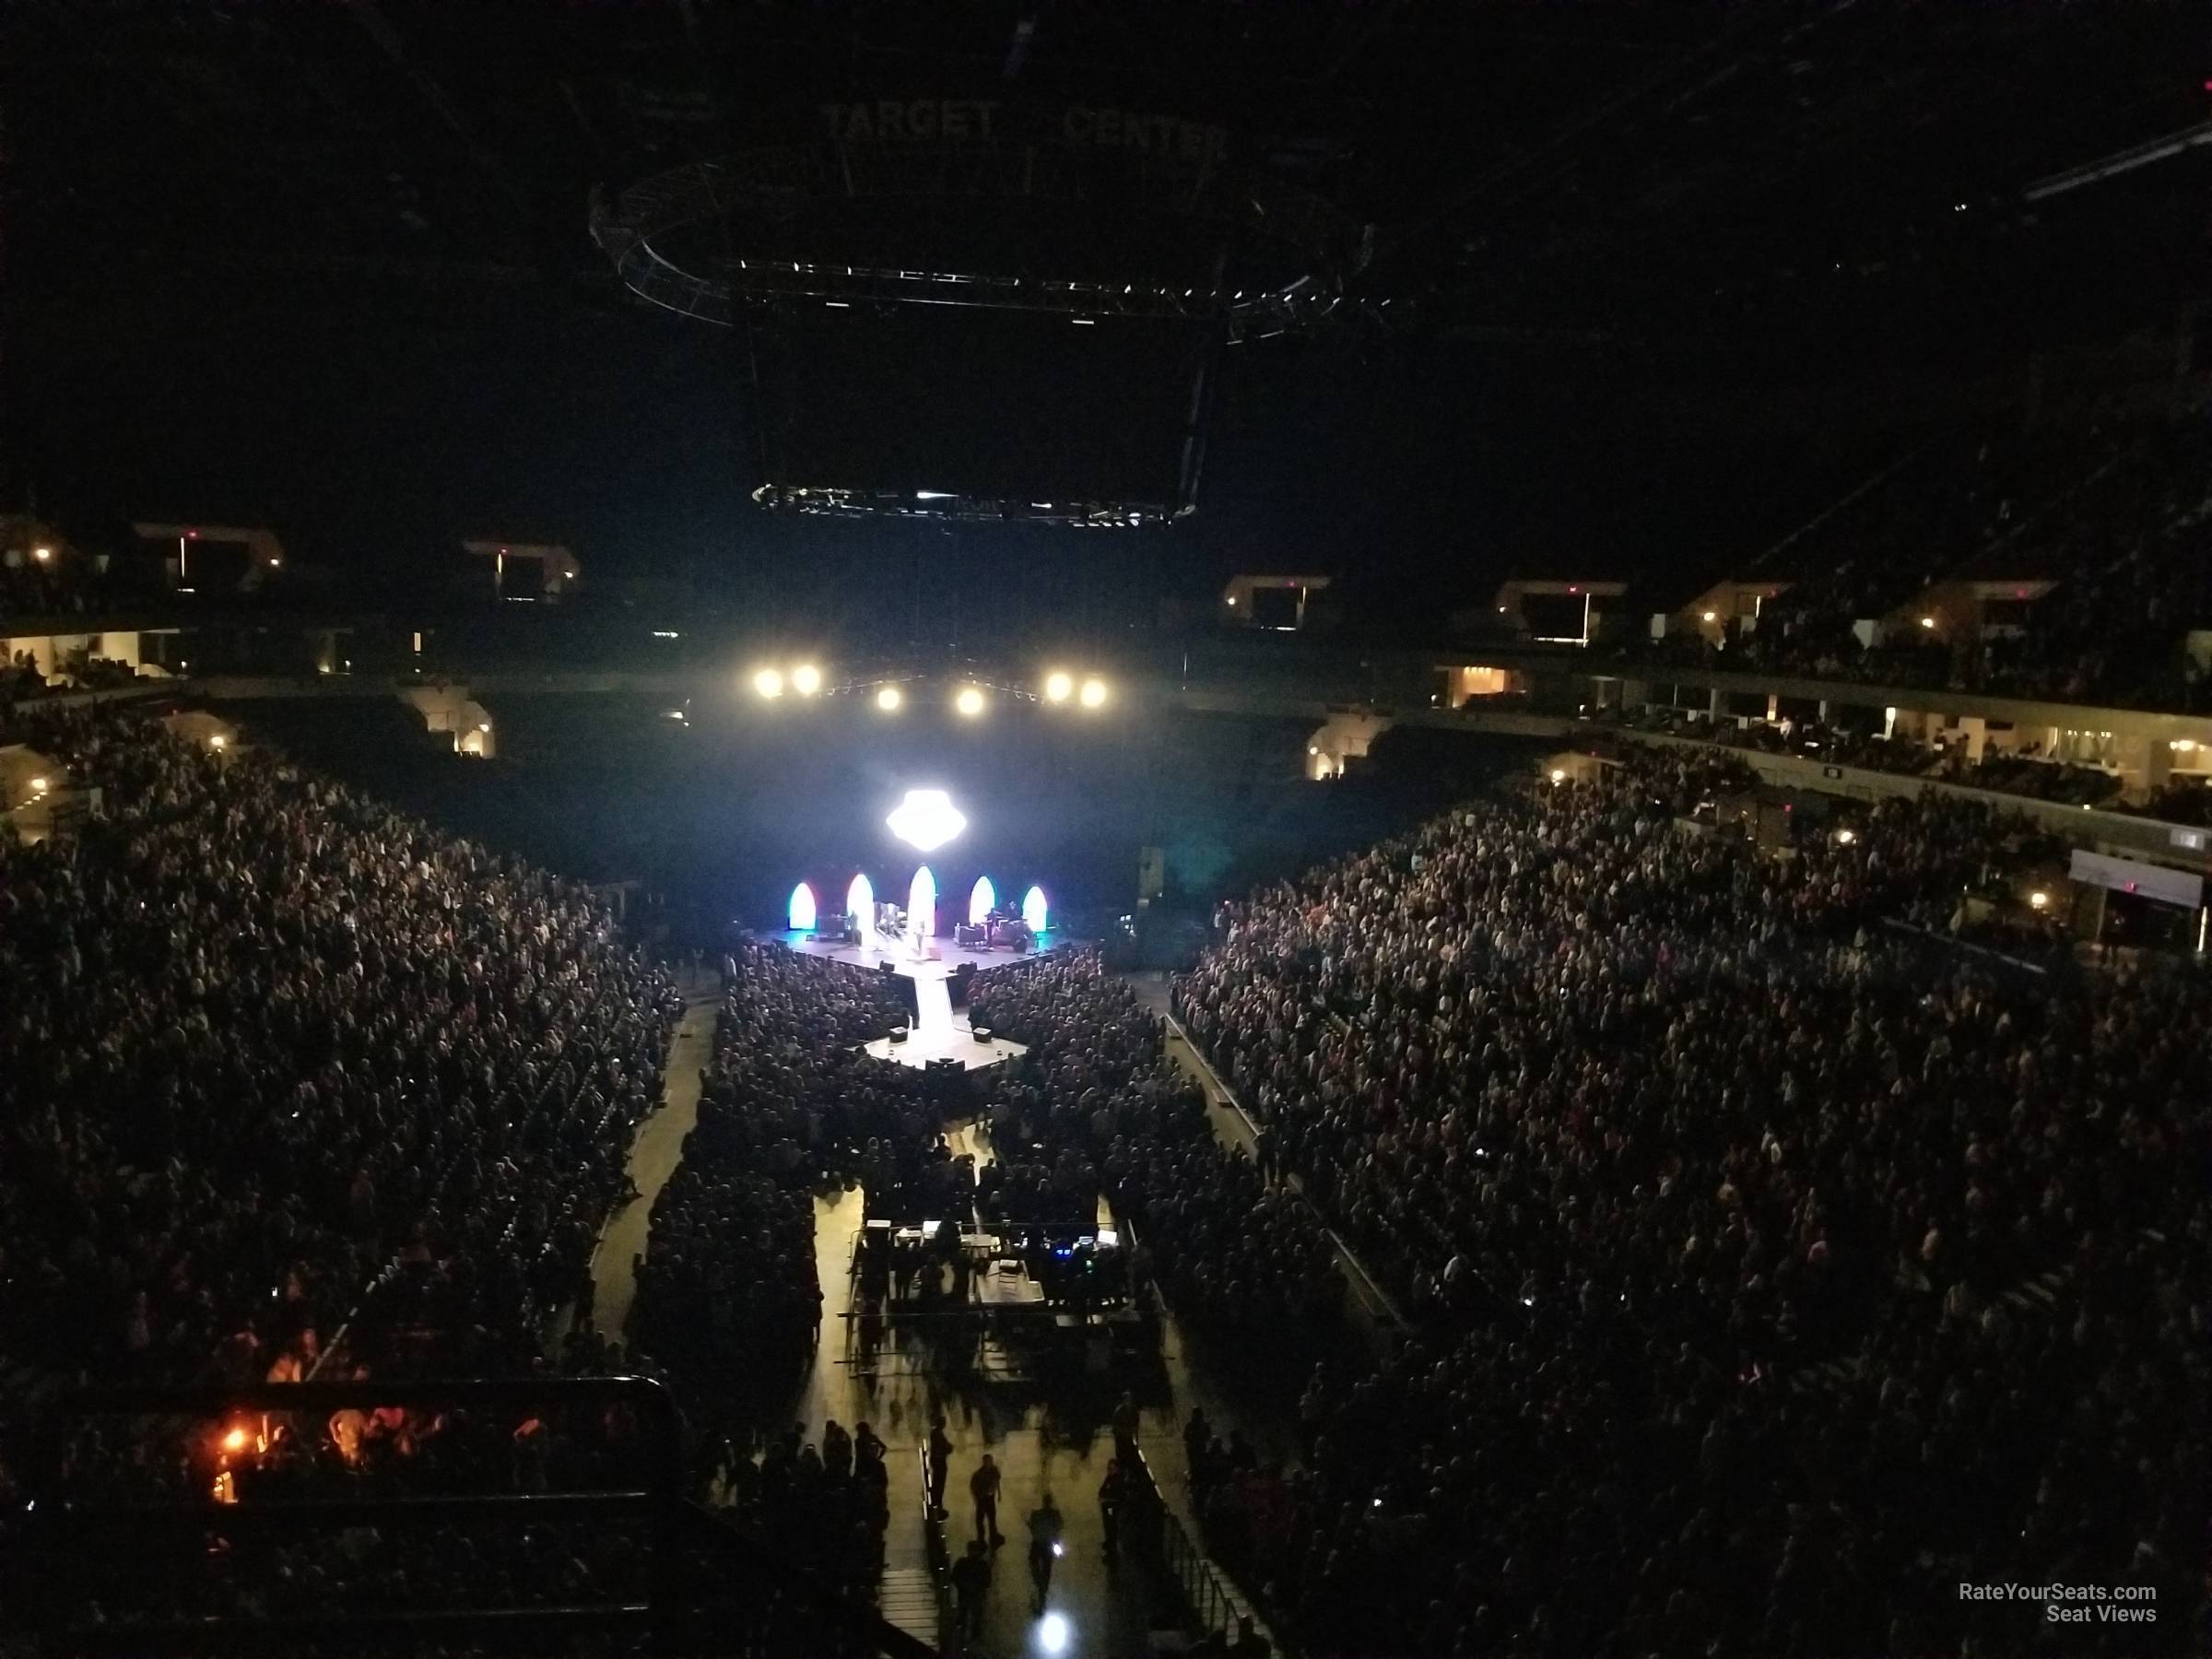 What Are The Best Floor Seats At A Concert Viewfloor.co